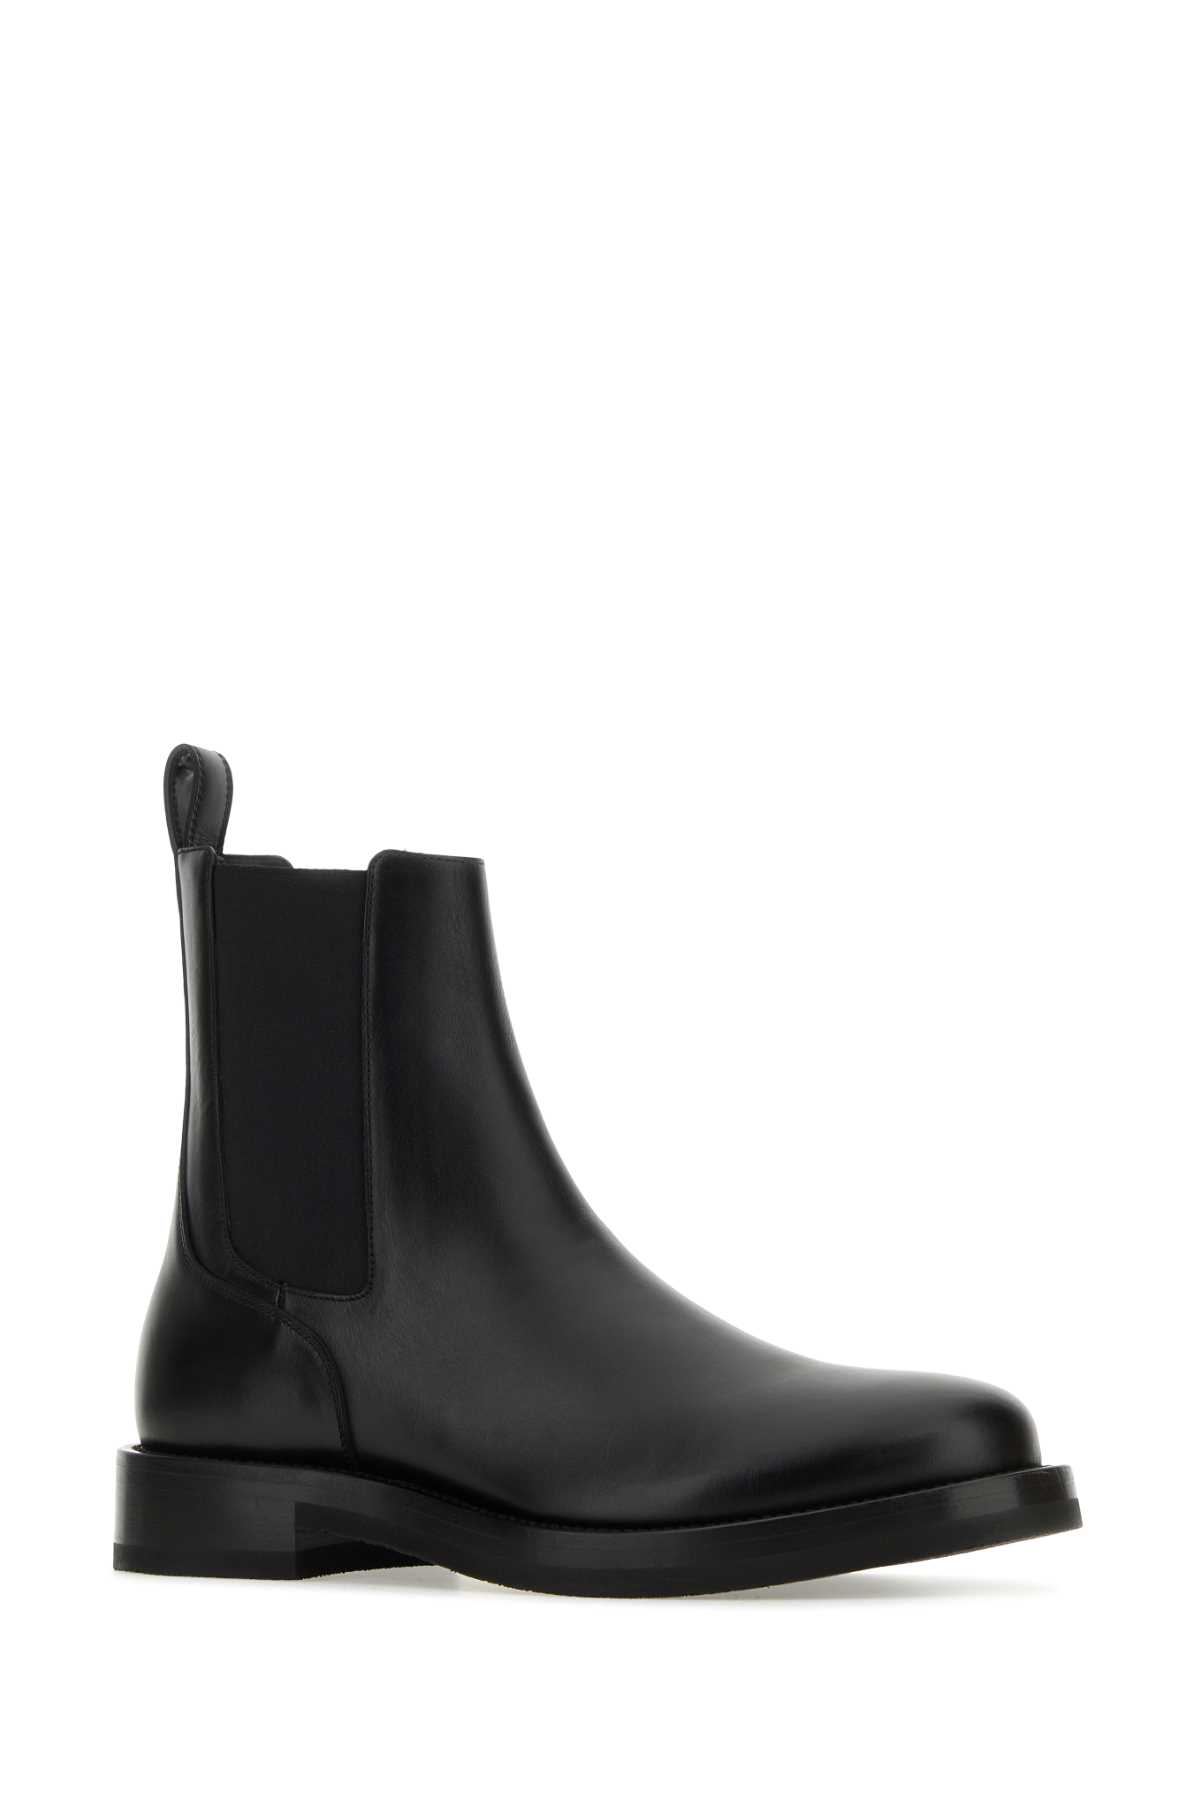 Shop Valentino Black Leather Rockstud Ankle Boots In Nero